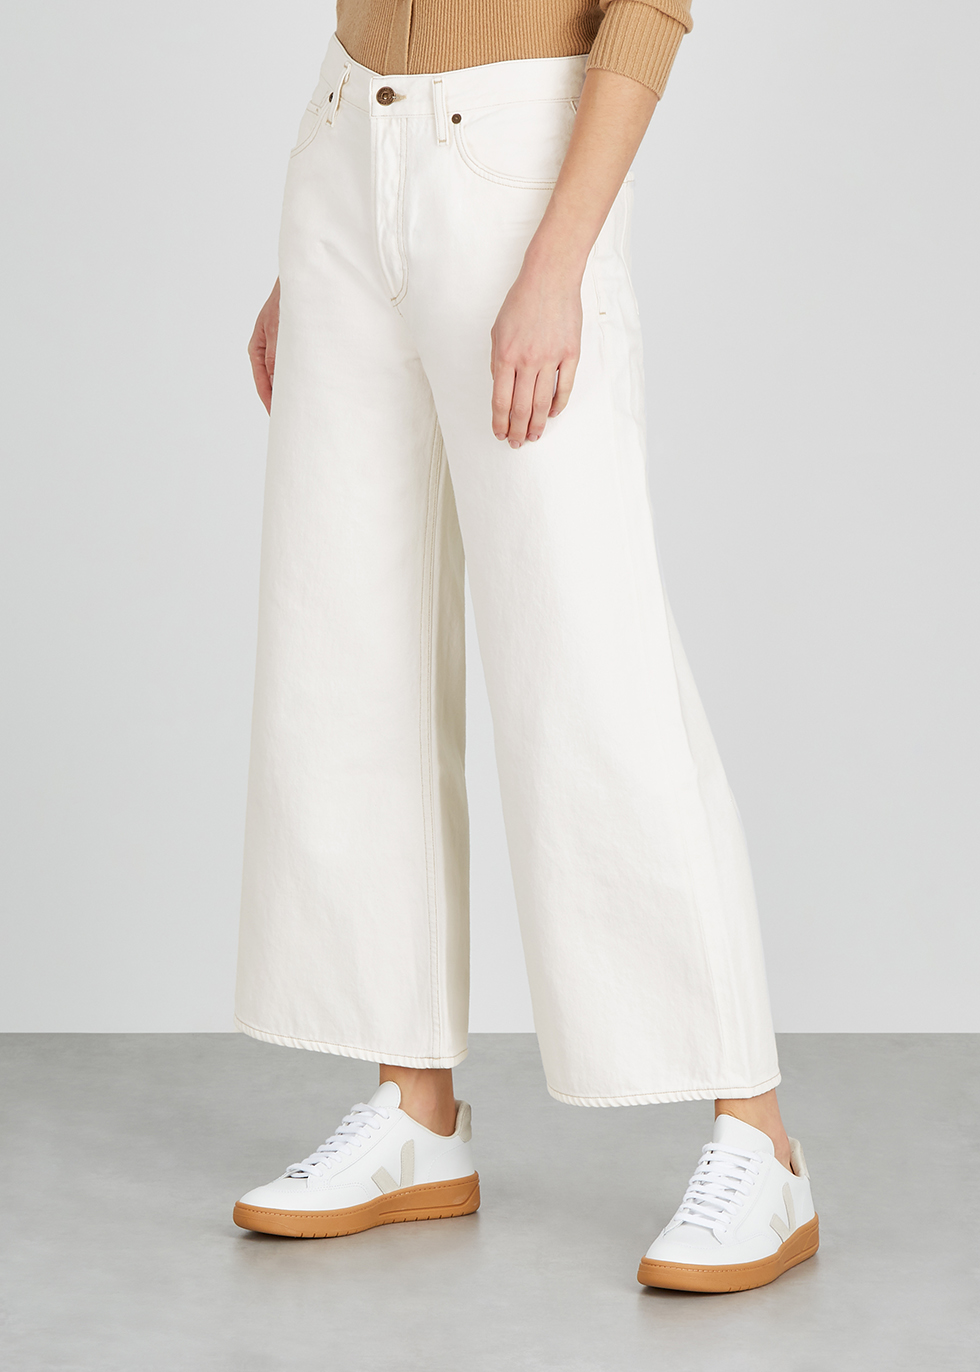 Serena off white wide-leg jeans - Citizens of Humanity